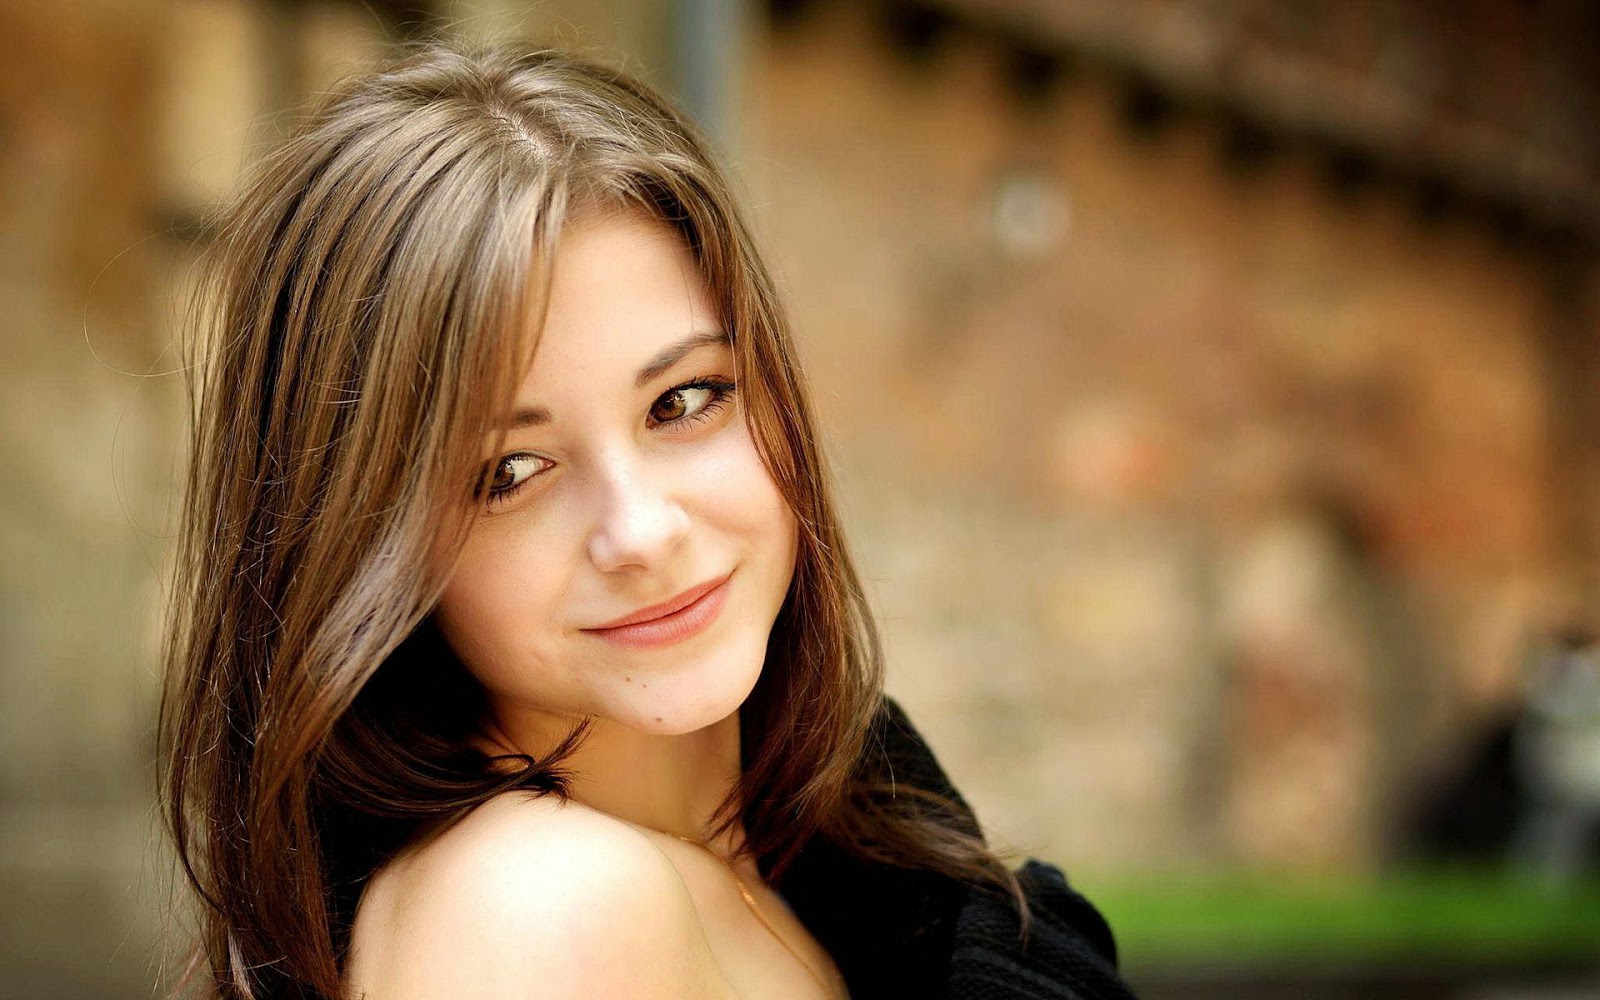 smile girl hd wallpaper,hair,face,hairstyle,beauty,brown hair